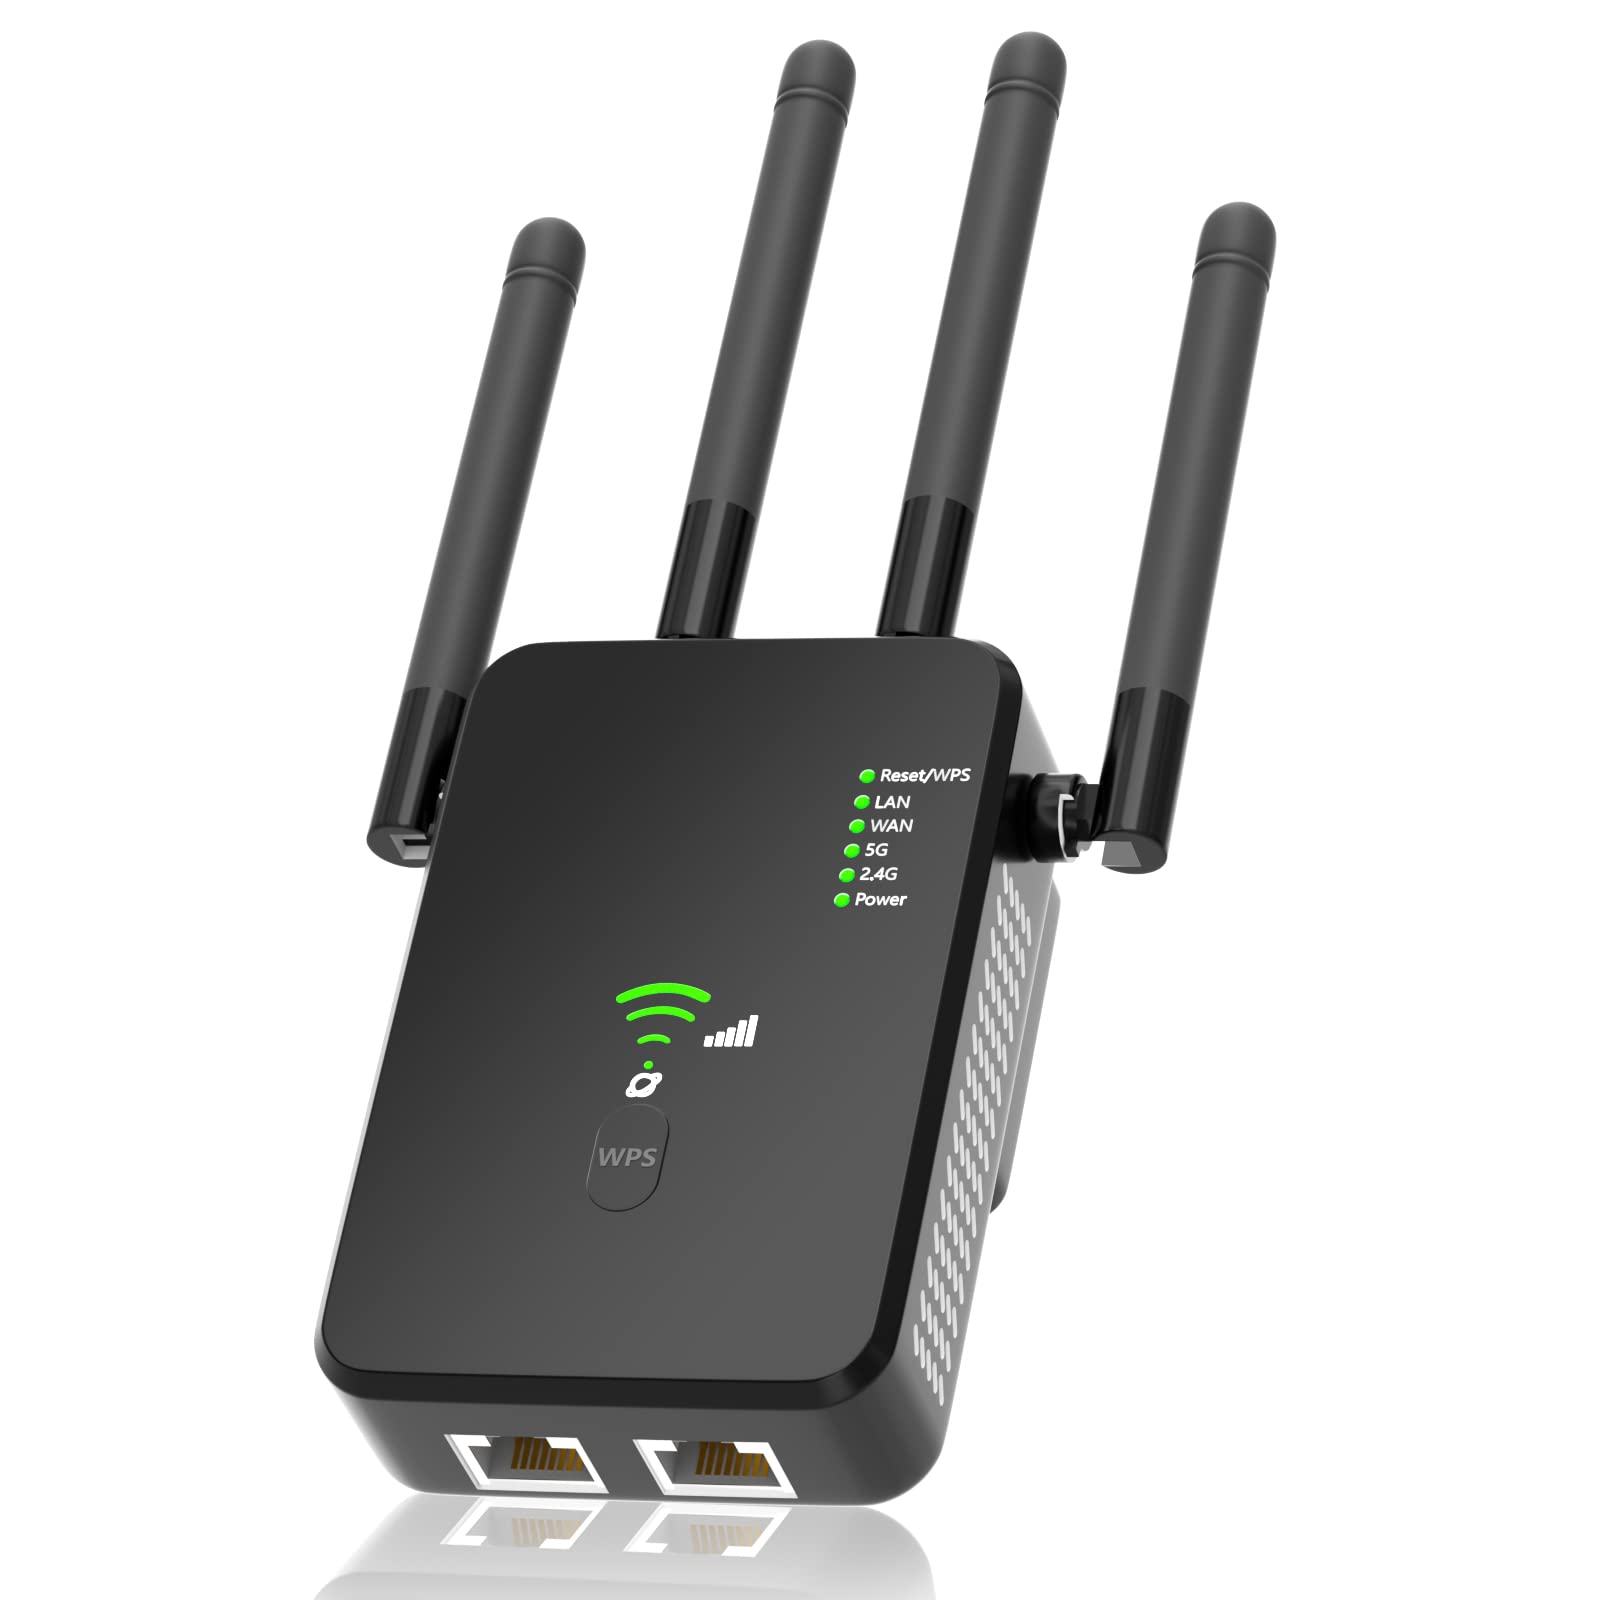 Use a Wi-Fi range extender to amplify the signal in larger spaces
Limit the number of devices connected to the Wi-Fi network